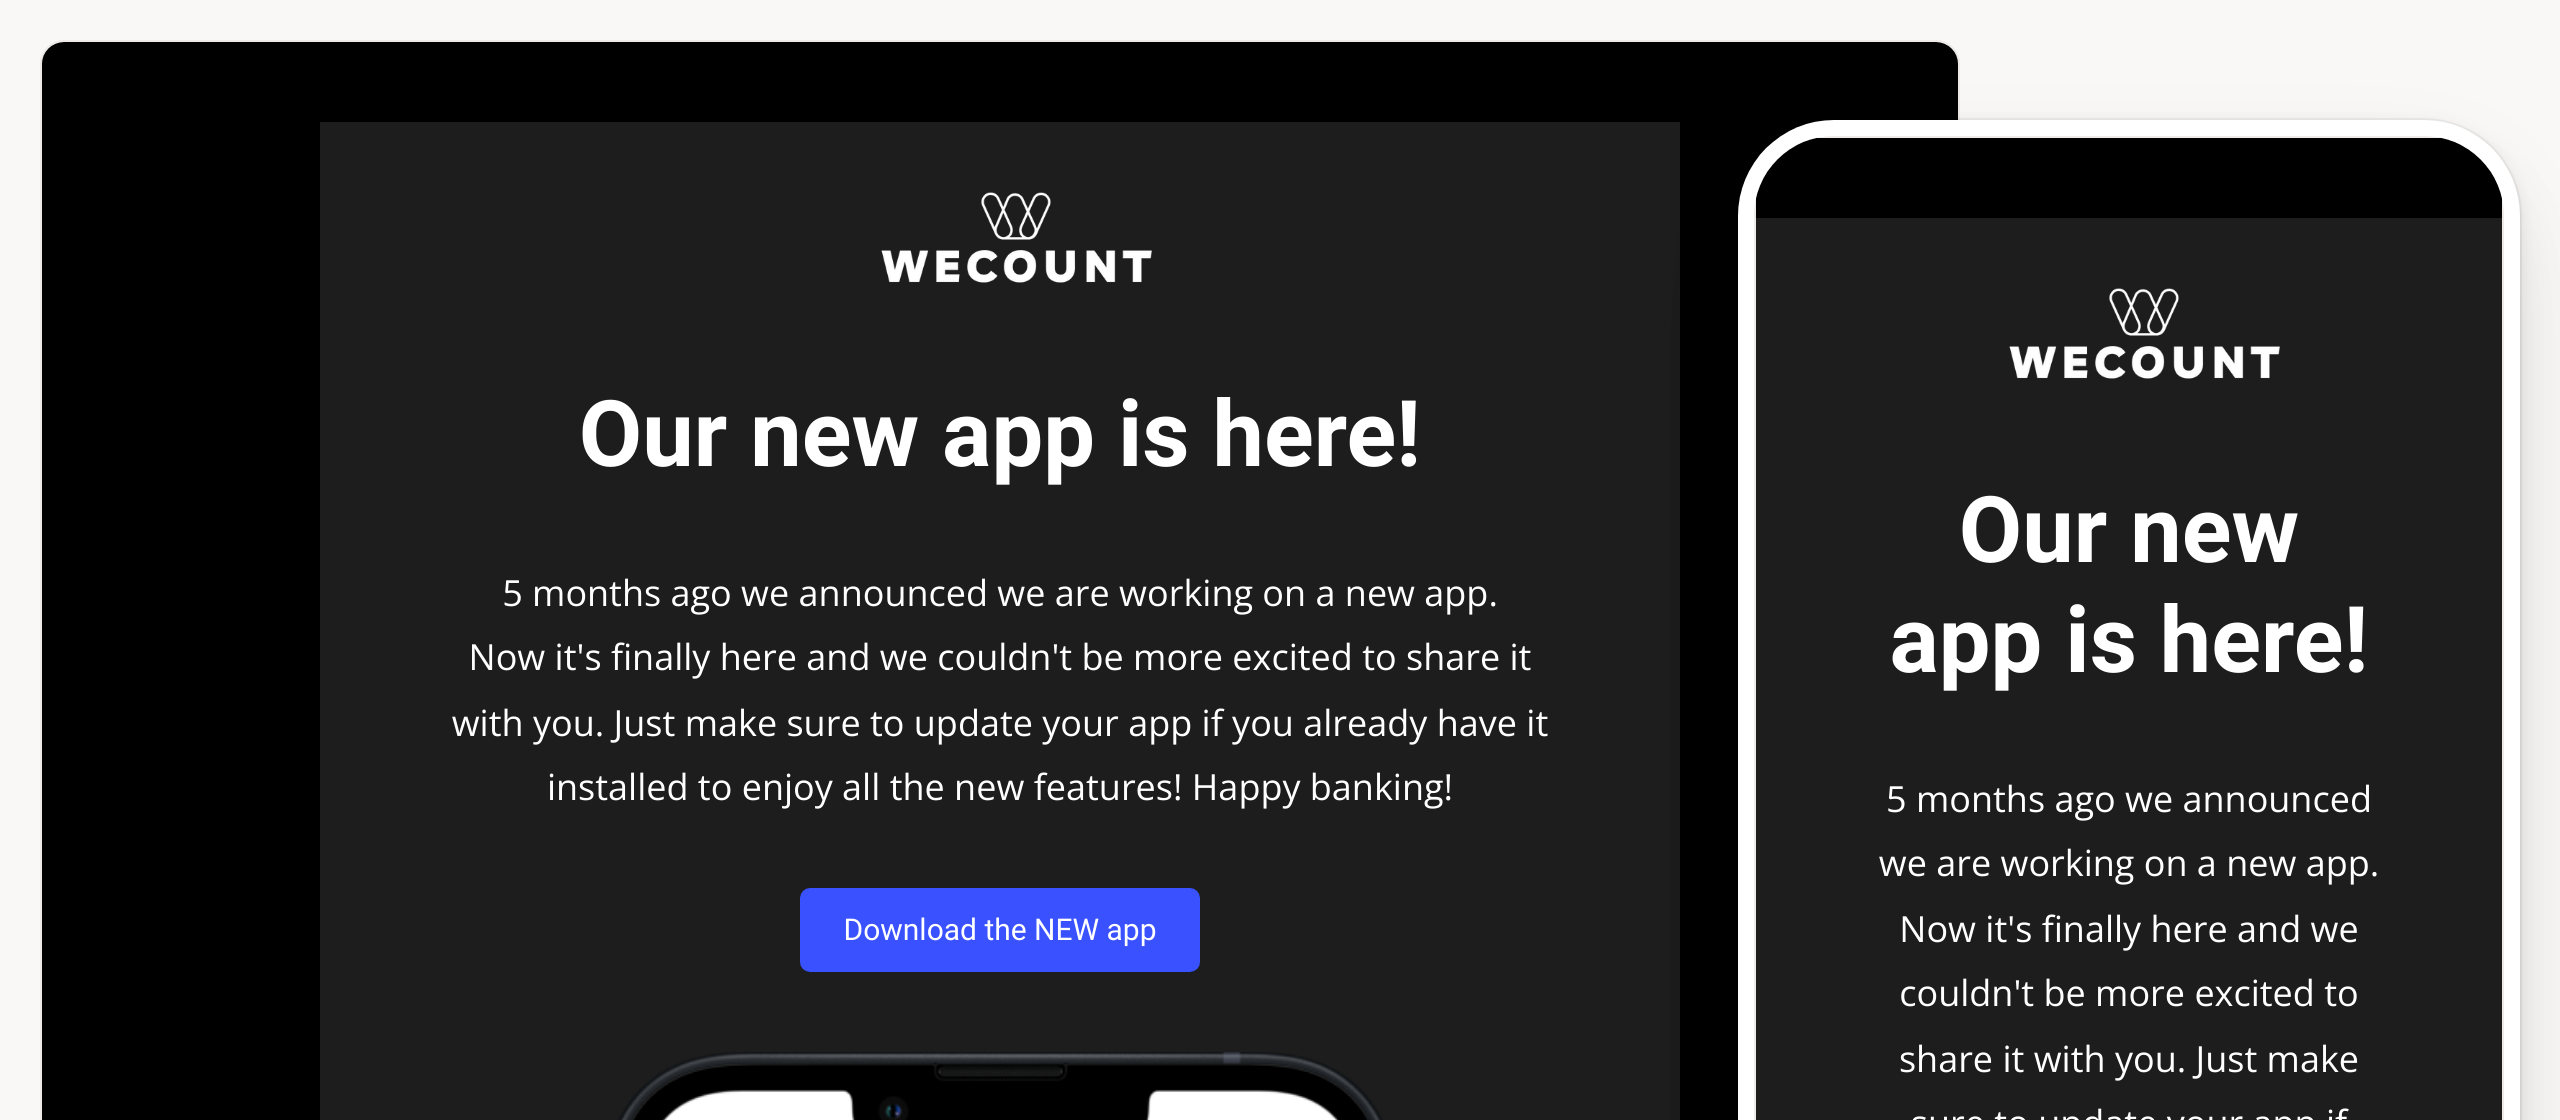 Promote new app features